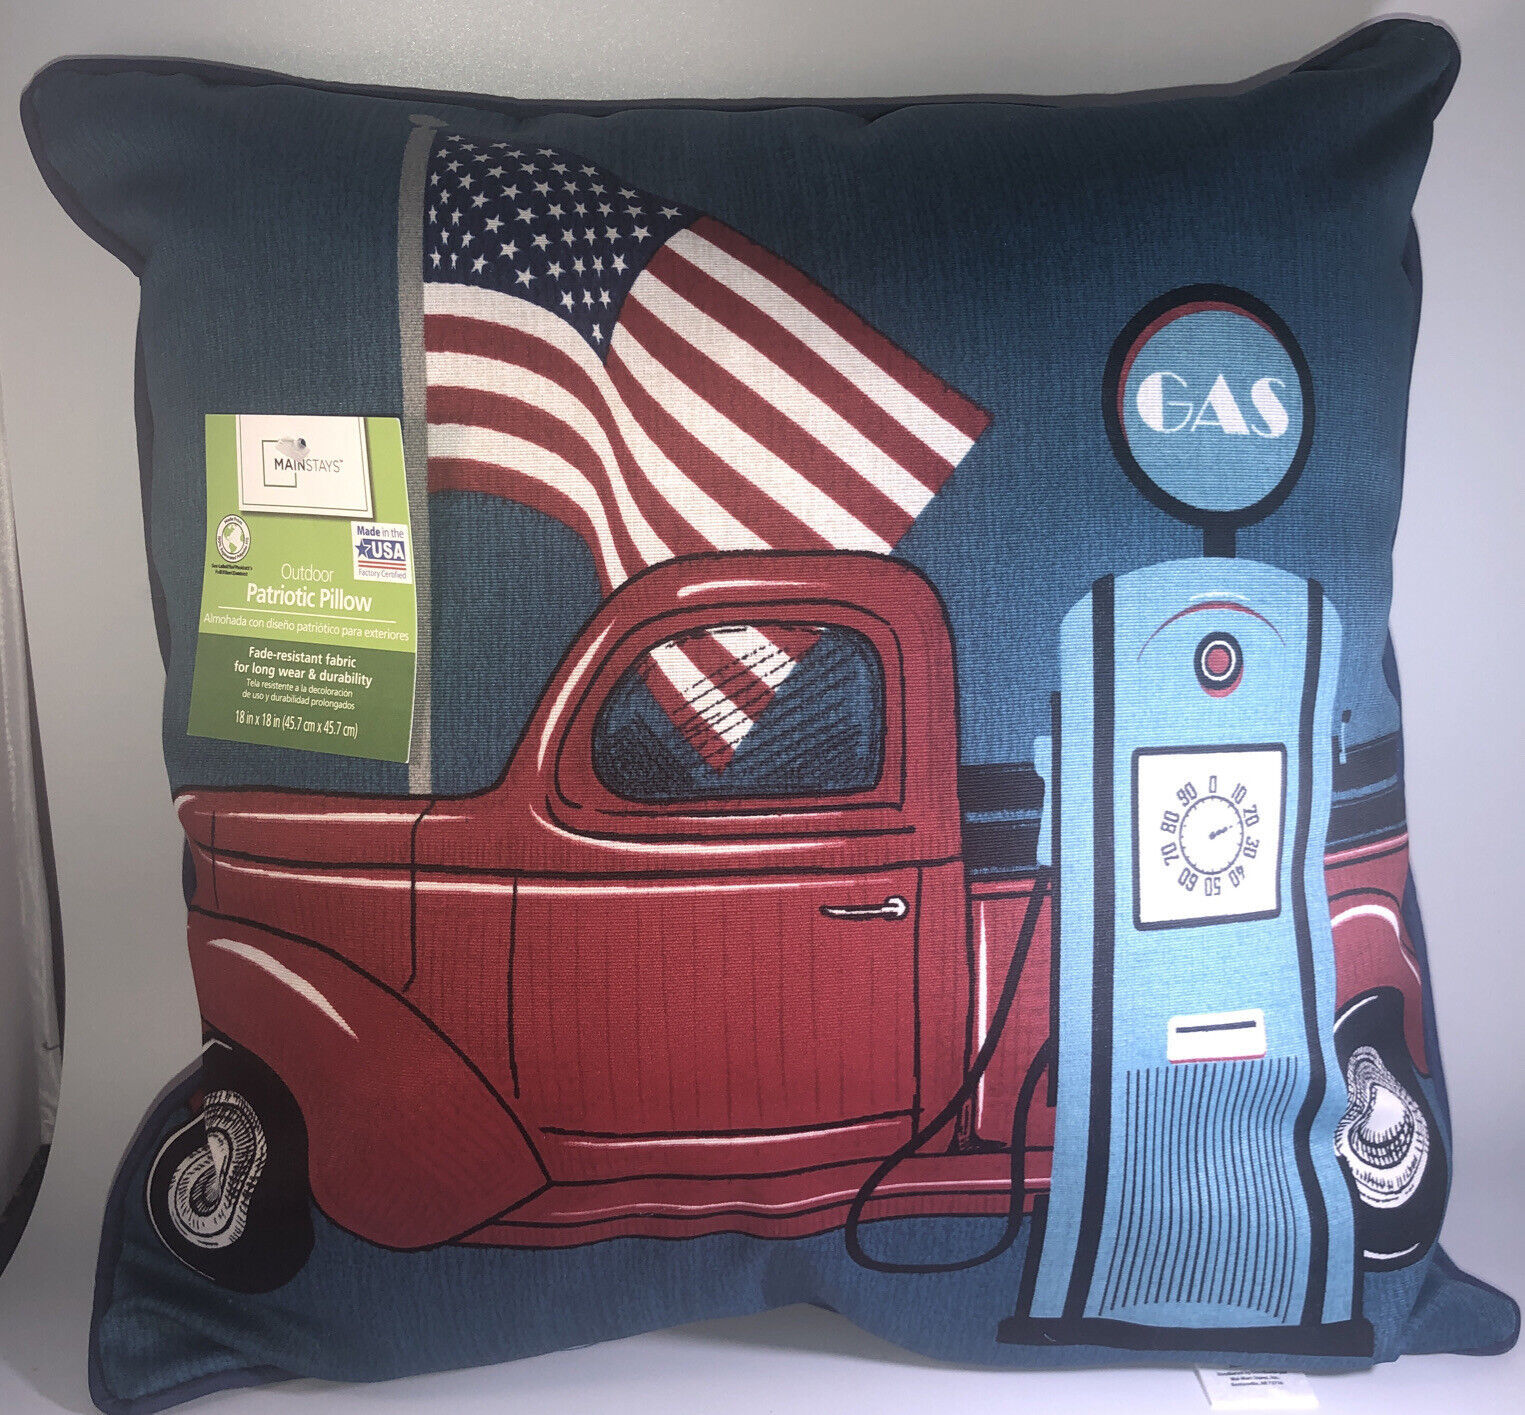 18”x18"Outdoor/Indoor Pillow-Fade Resistant-BRAND NEW-SHIPS SAME BUSINESS DAY - $24.63